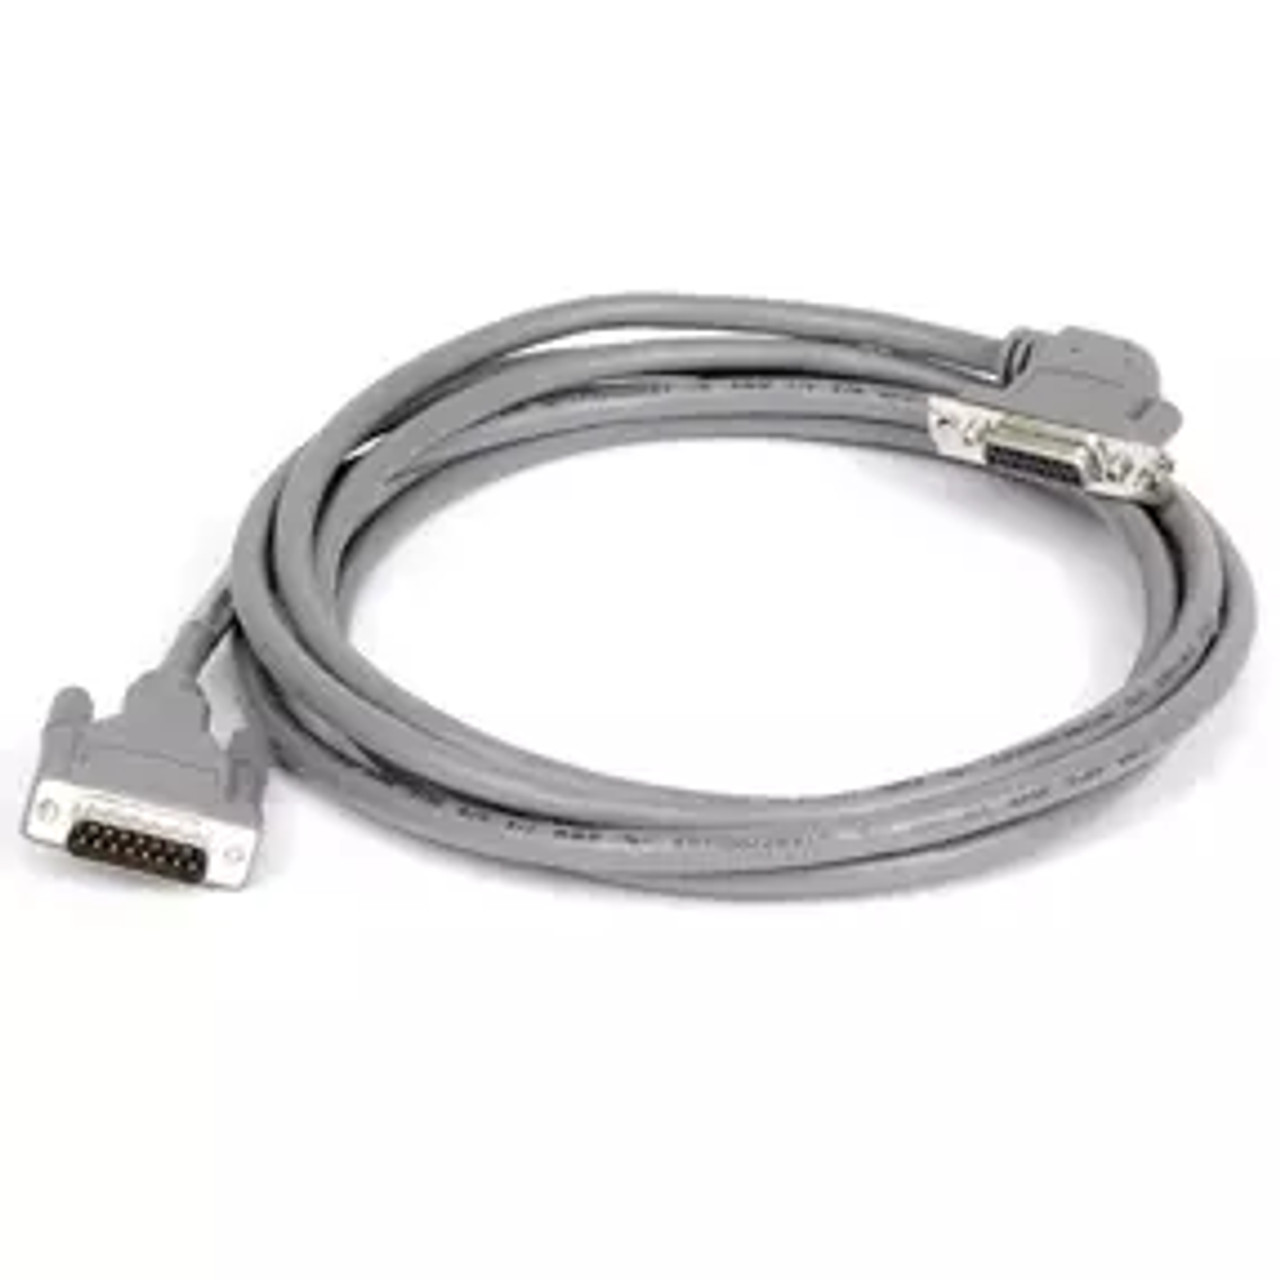 Stalker - 155-2211-00 - REMOTE DISPLAY INTRCONNECT CABLE , 10 Foot